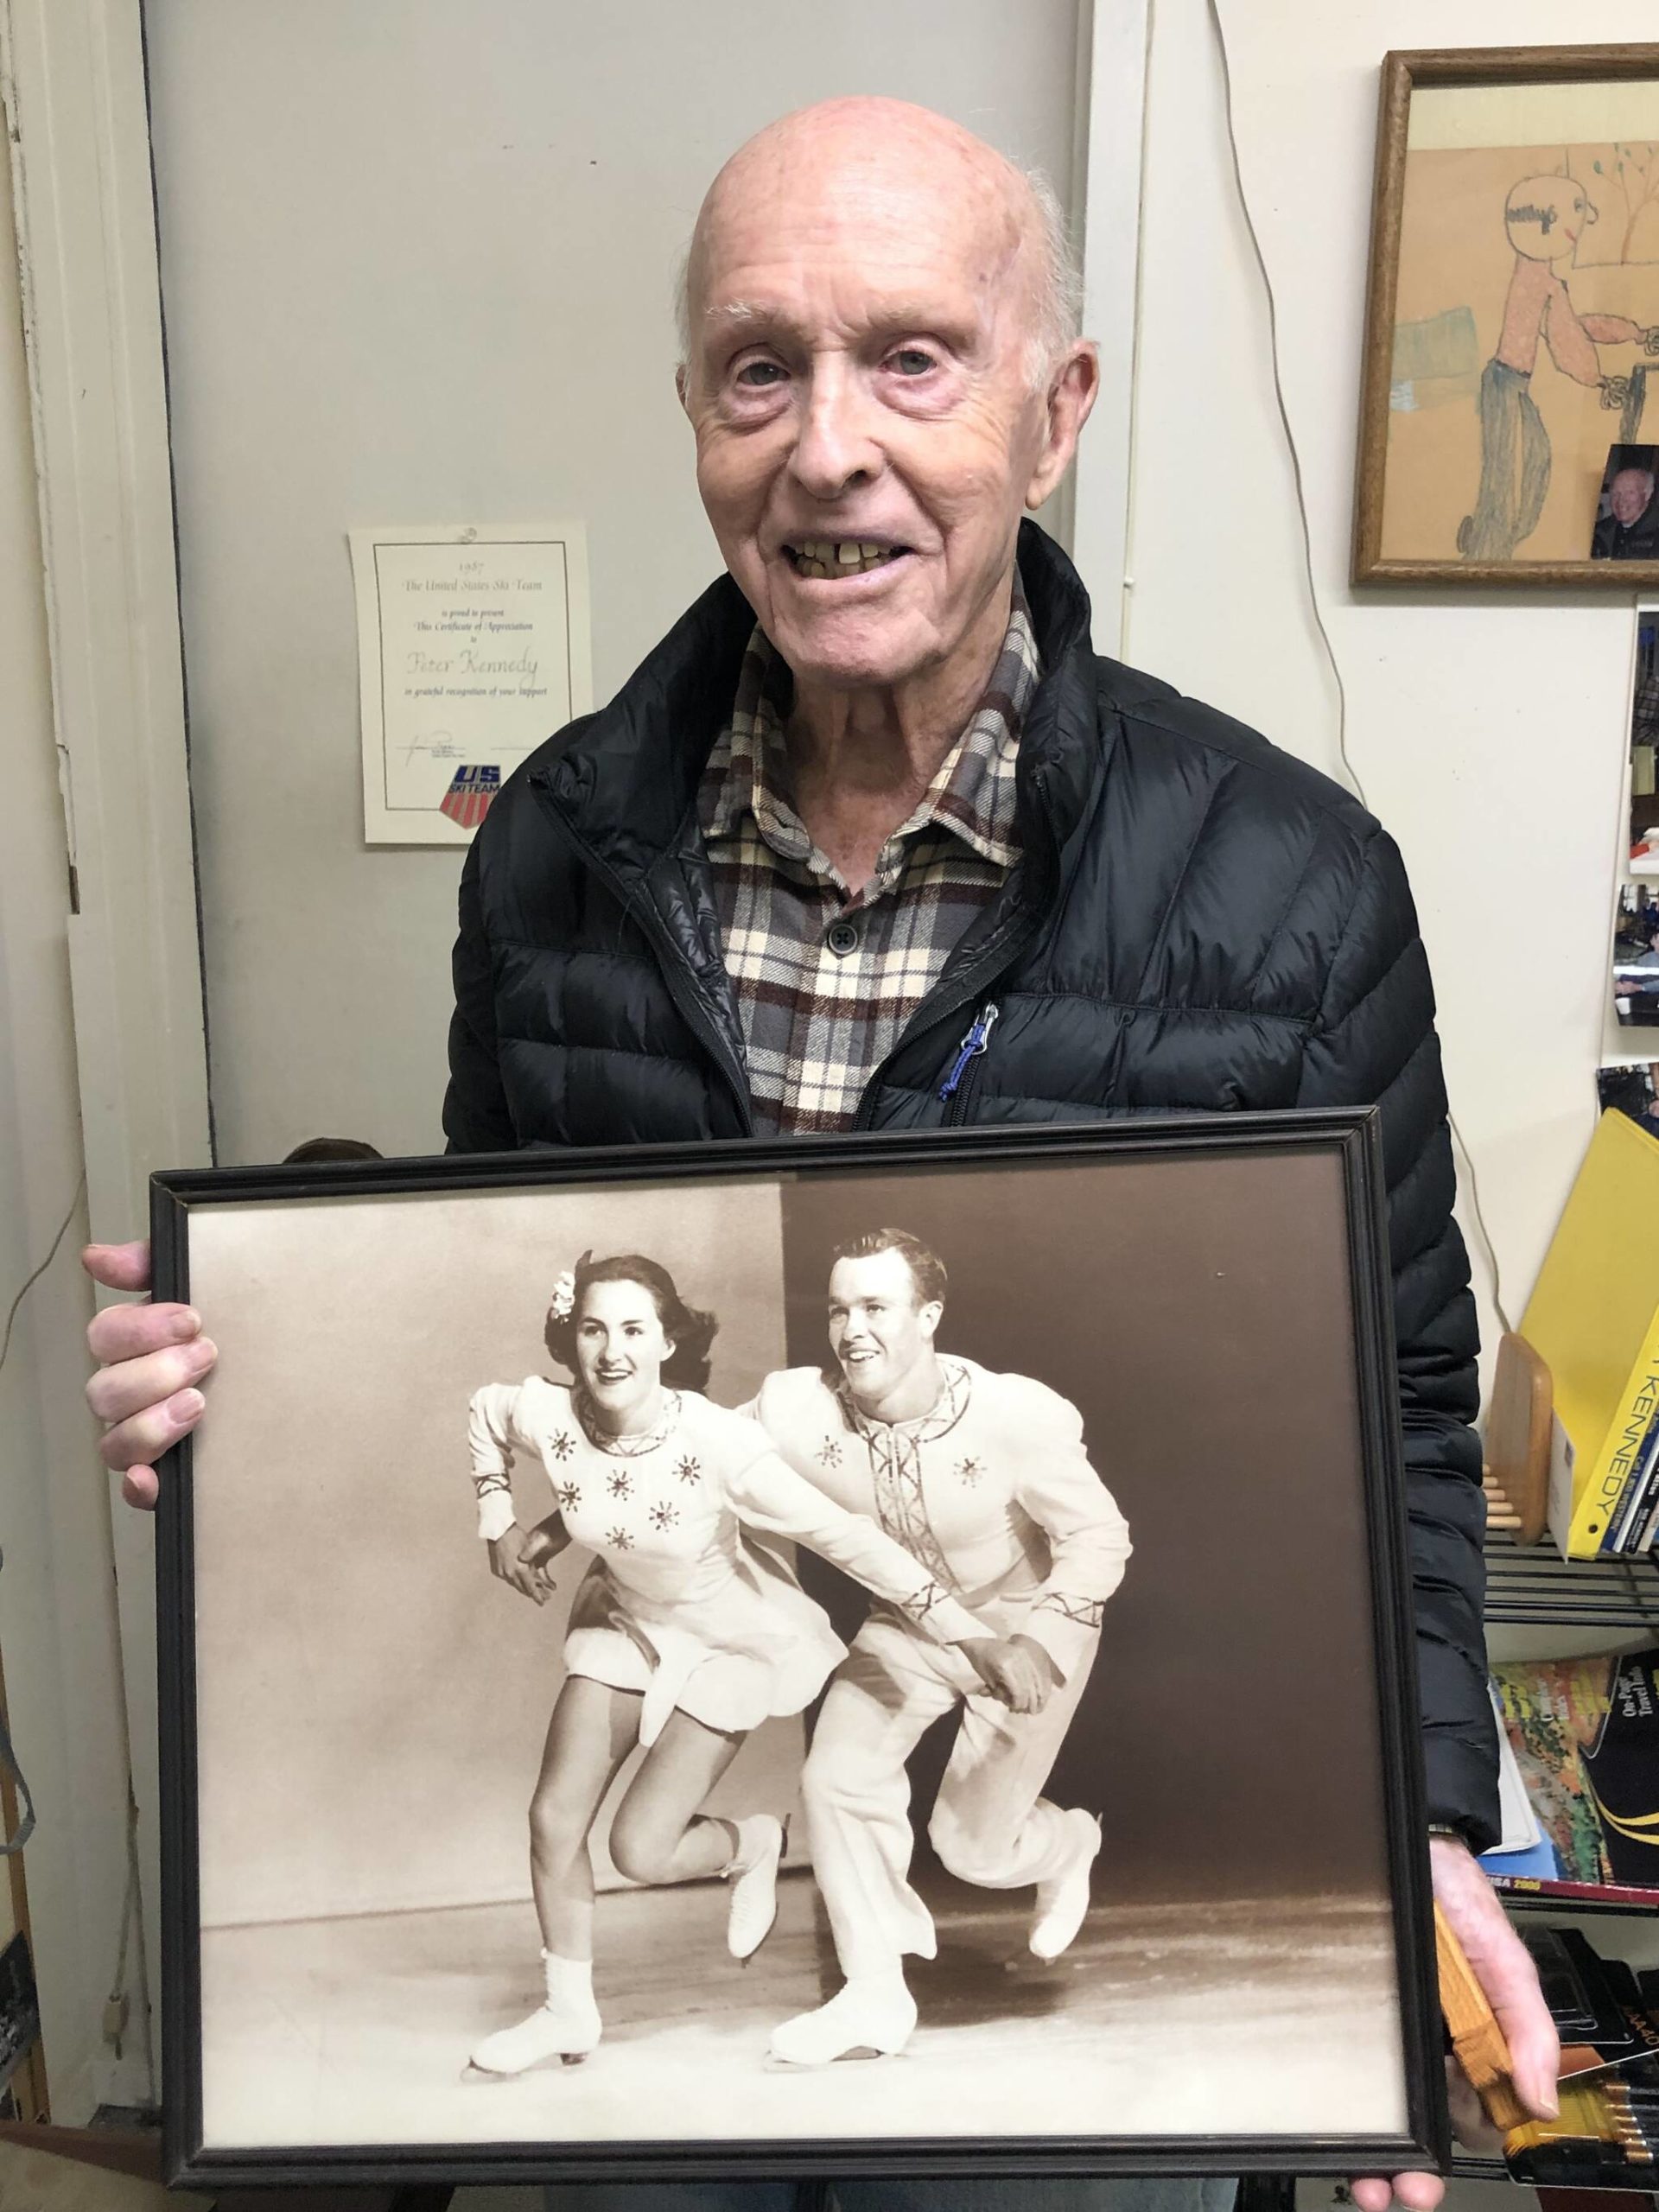 Peter Kennedy displays a photo of him and his sister Karol, who were the pairs figure skating silver medalists at the 1952 Winter Games in Oslo. Courtesy photo